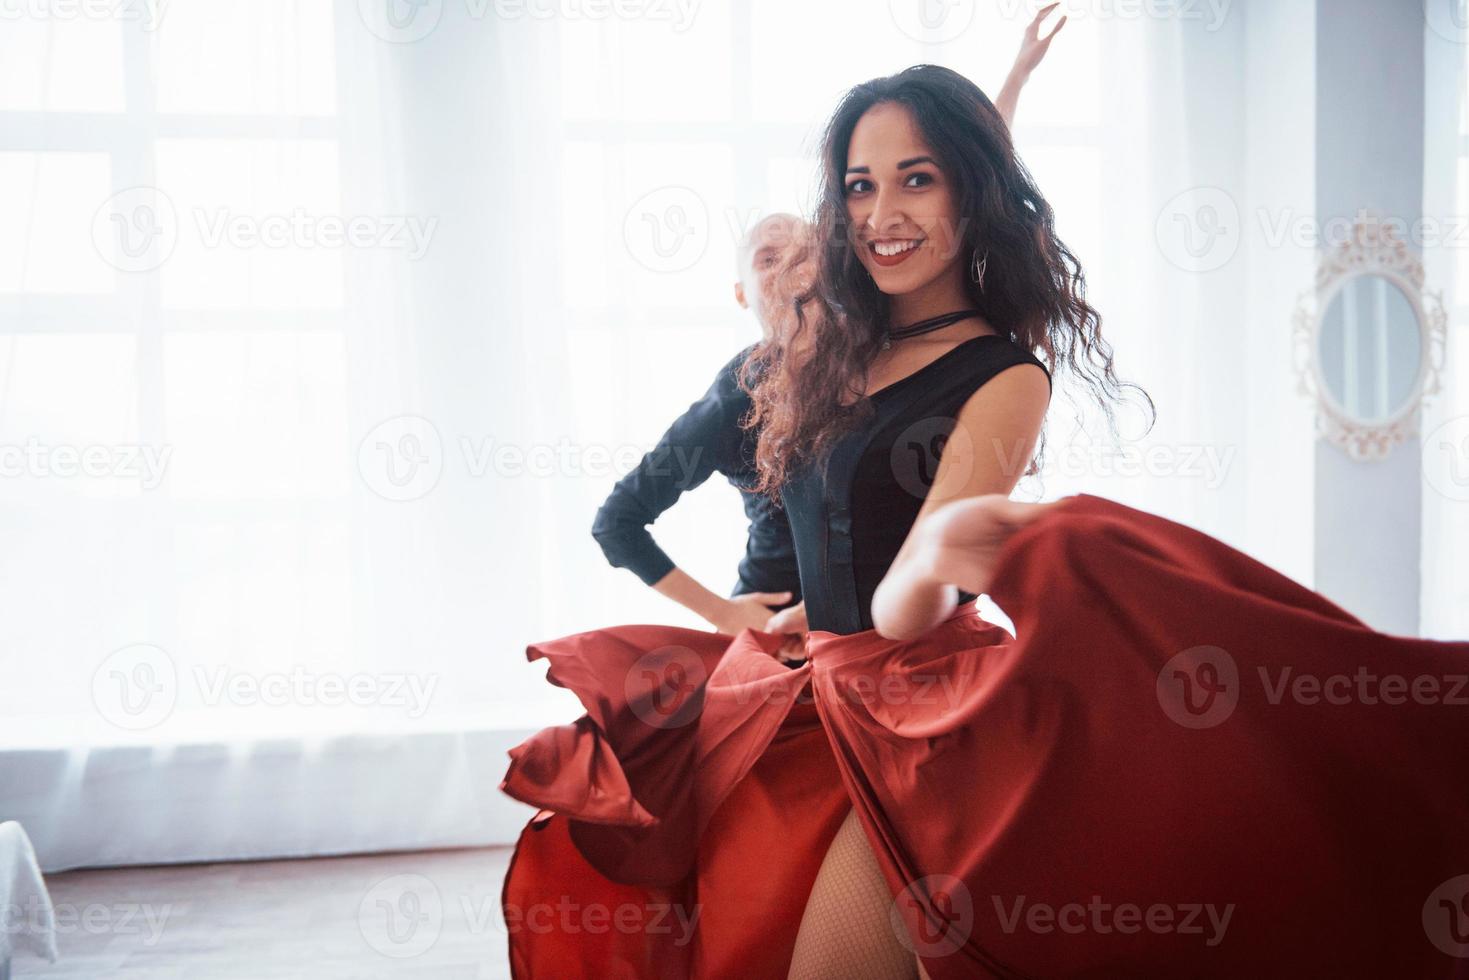 Smiles during the process. Young pretty woman in red and black clothes dancing with bald guy in the white room photo